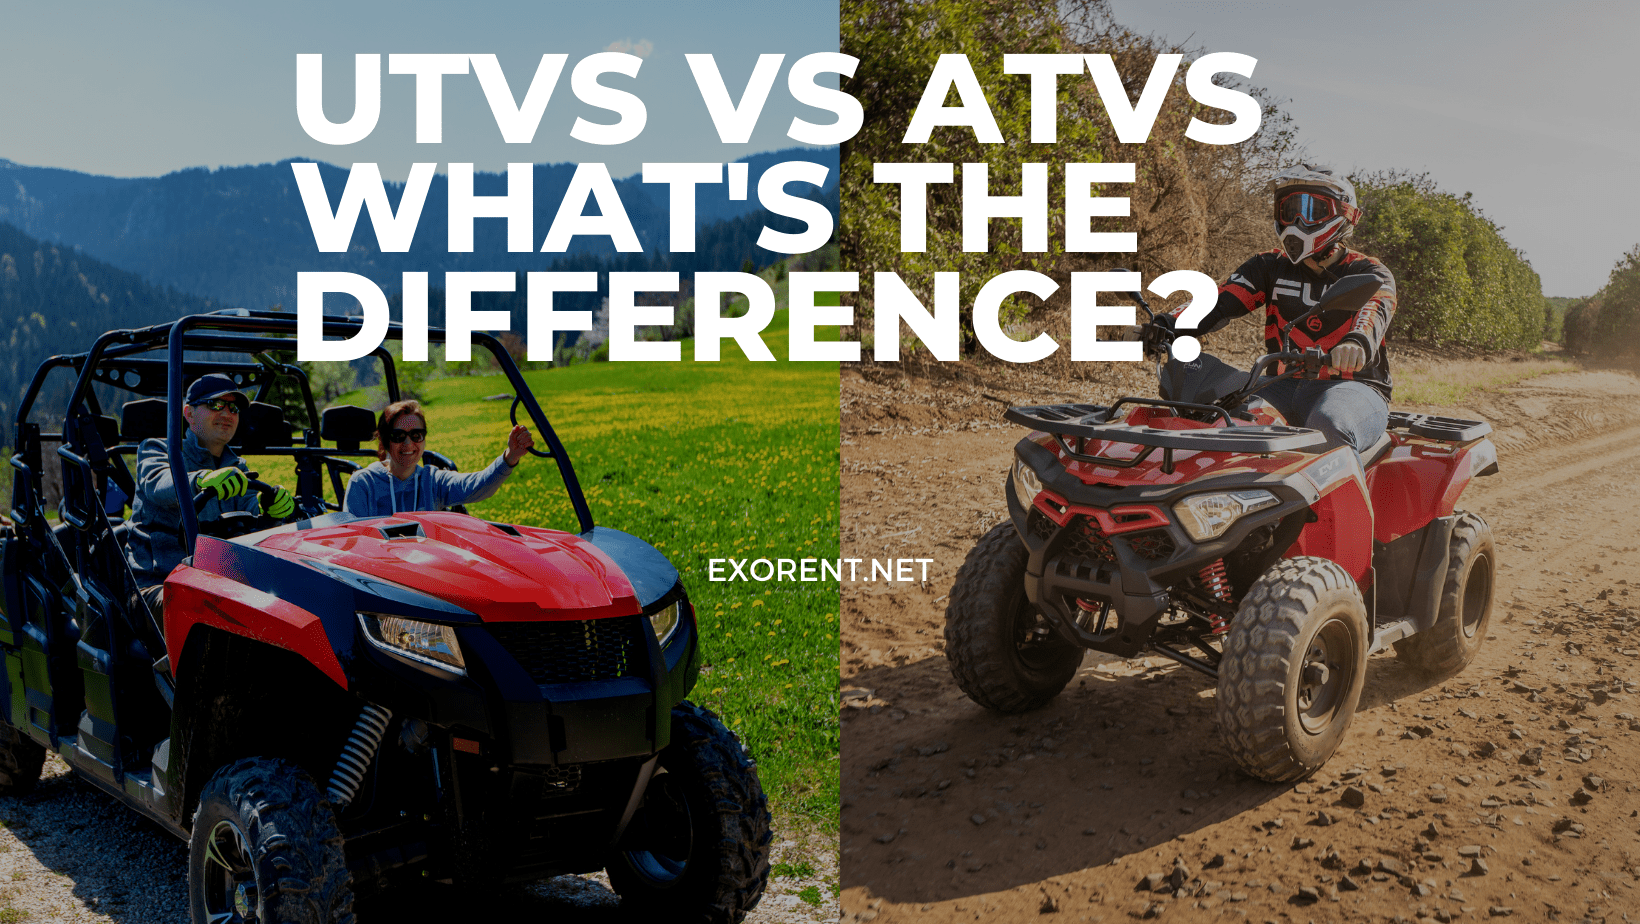 What Is The Difference Between UTVs And ATVs?